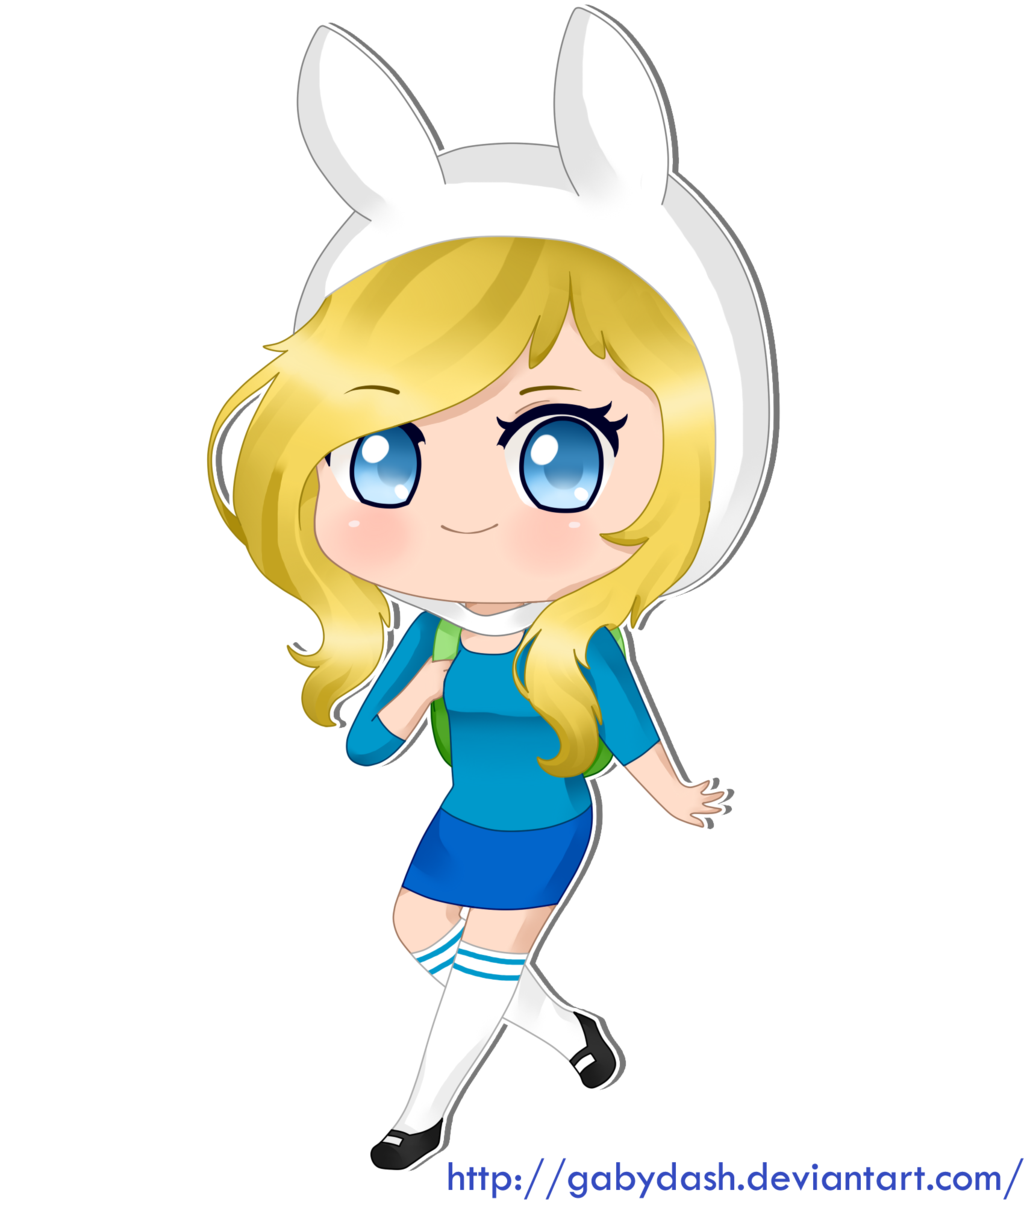 Fionna the Human by GabyDash on